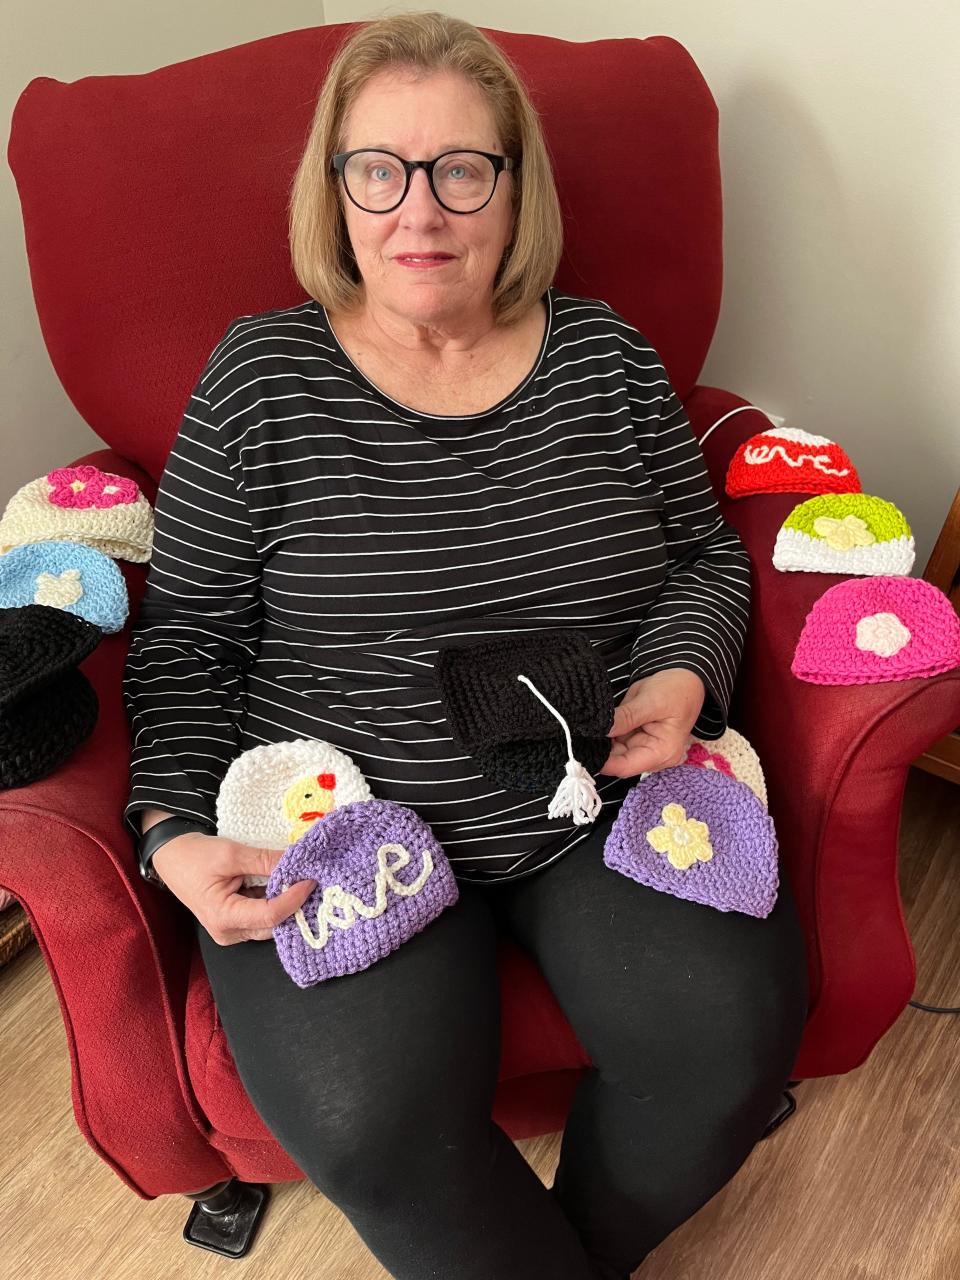 "She was doing something for somebody; I need to turn around and try to honor her," said Tennessee resident Linda Clark, 70, of continuing her late mother's knitting project for babies with heart defects. "Somehow, I thought a part of her was with me while I was doing that."